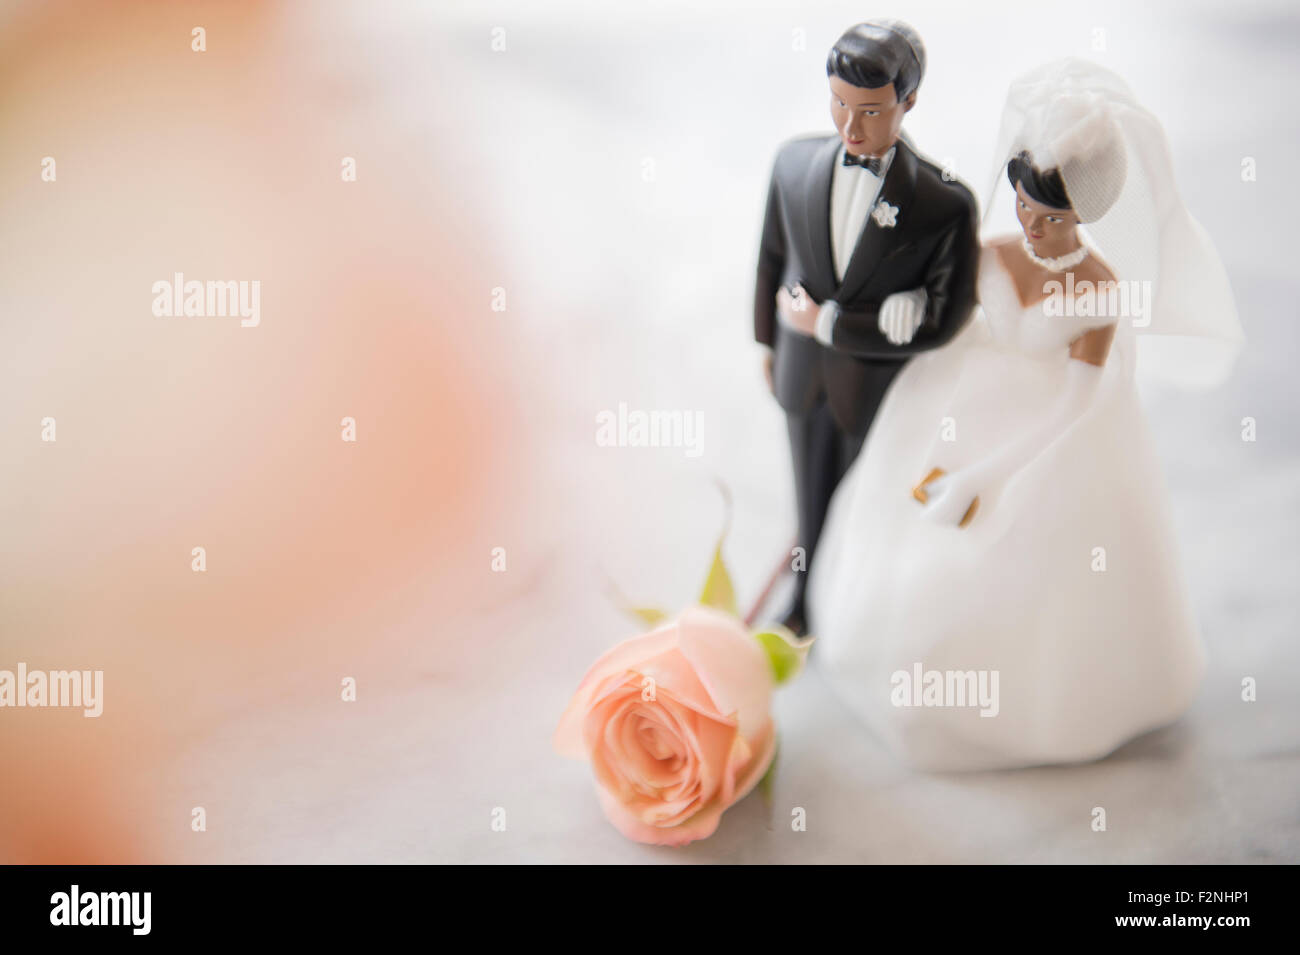 Close up of Bride and Groom wedding cake topper Banque D'Images